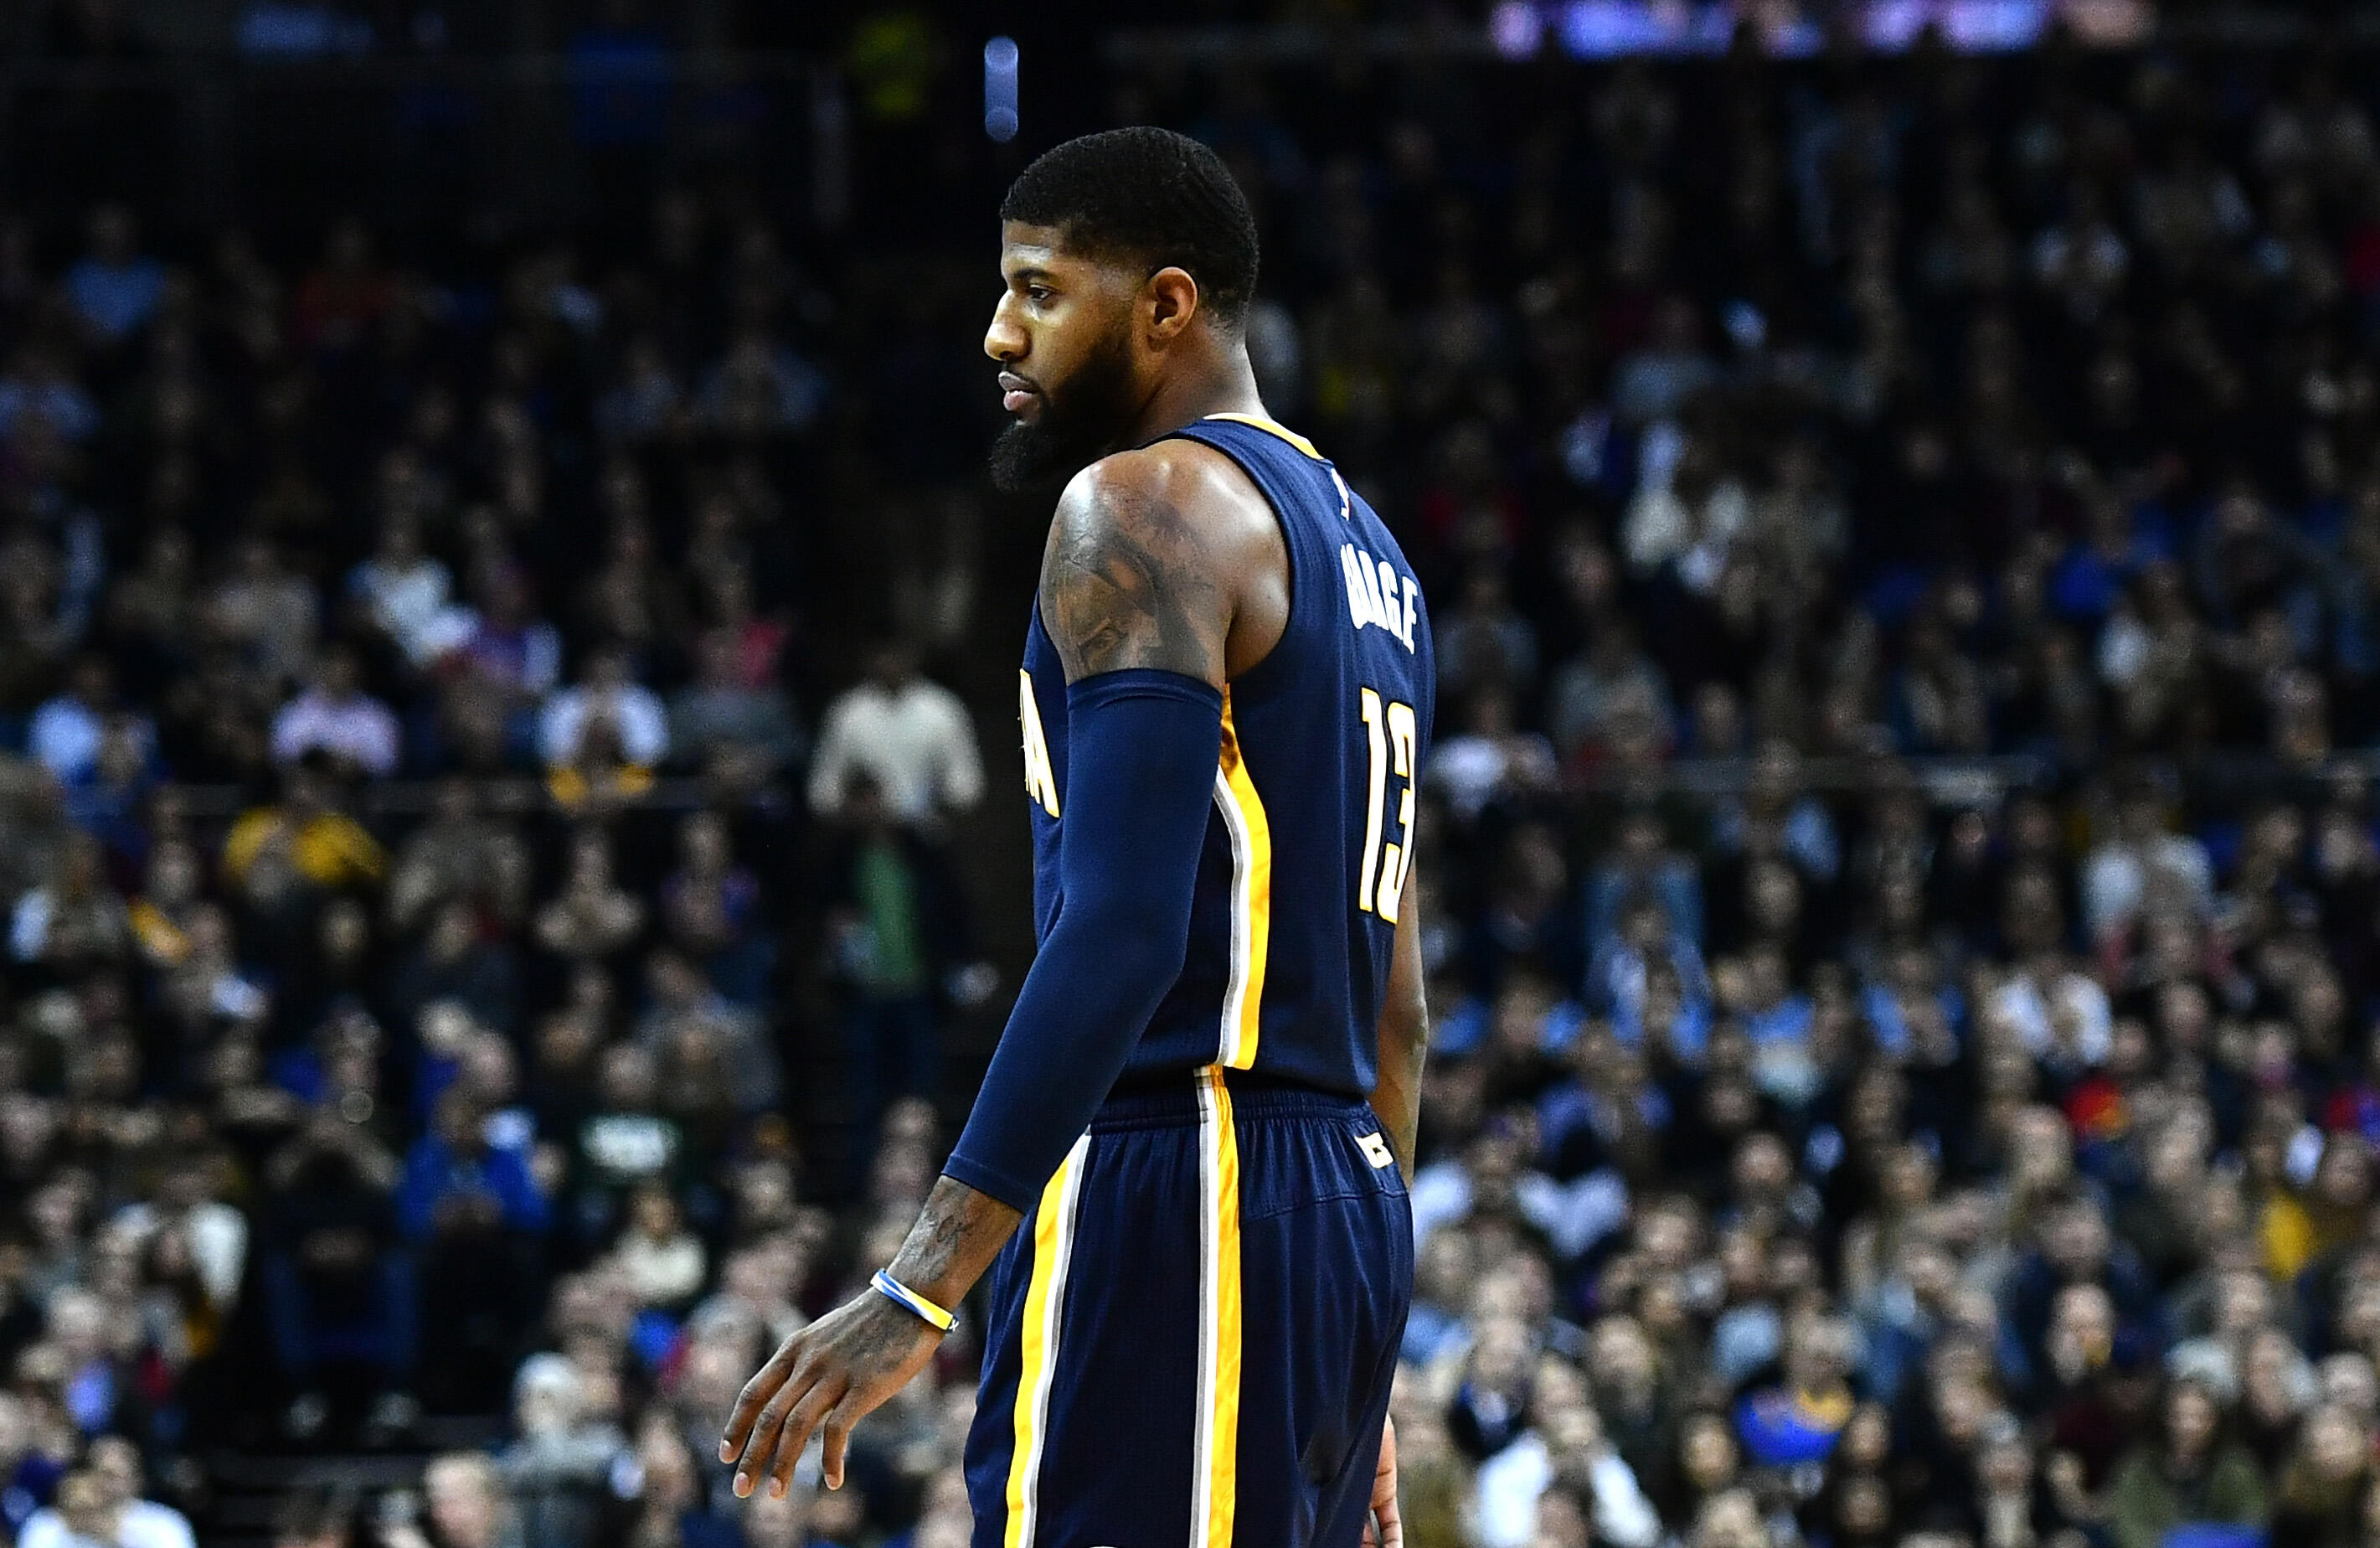 LONDON, ENGLAND - JANUARY 12:  Paul George #13 of the Indiana Pacers in action during the NBA match between Indiana Pacers and Denver Nuggets at the O2 Arena on January 12, 2017 in London, England.  (Photo by Dan Mullan/Getty Images)